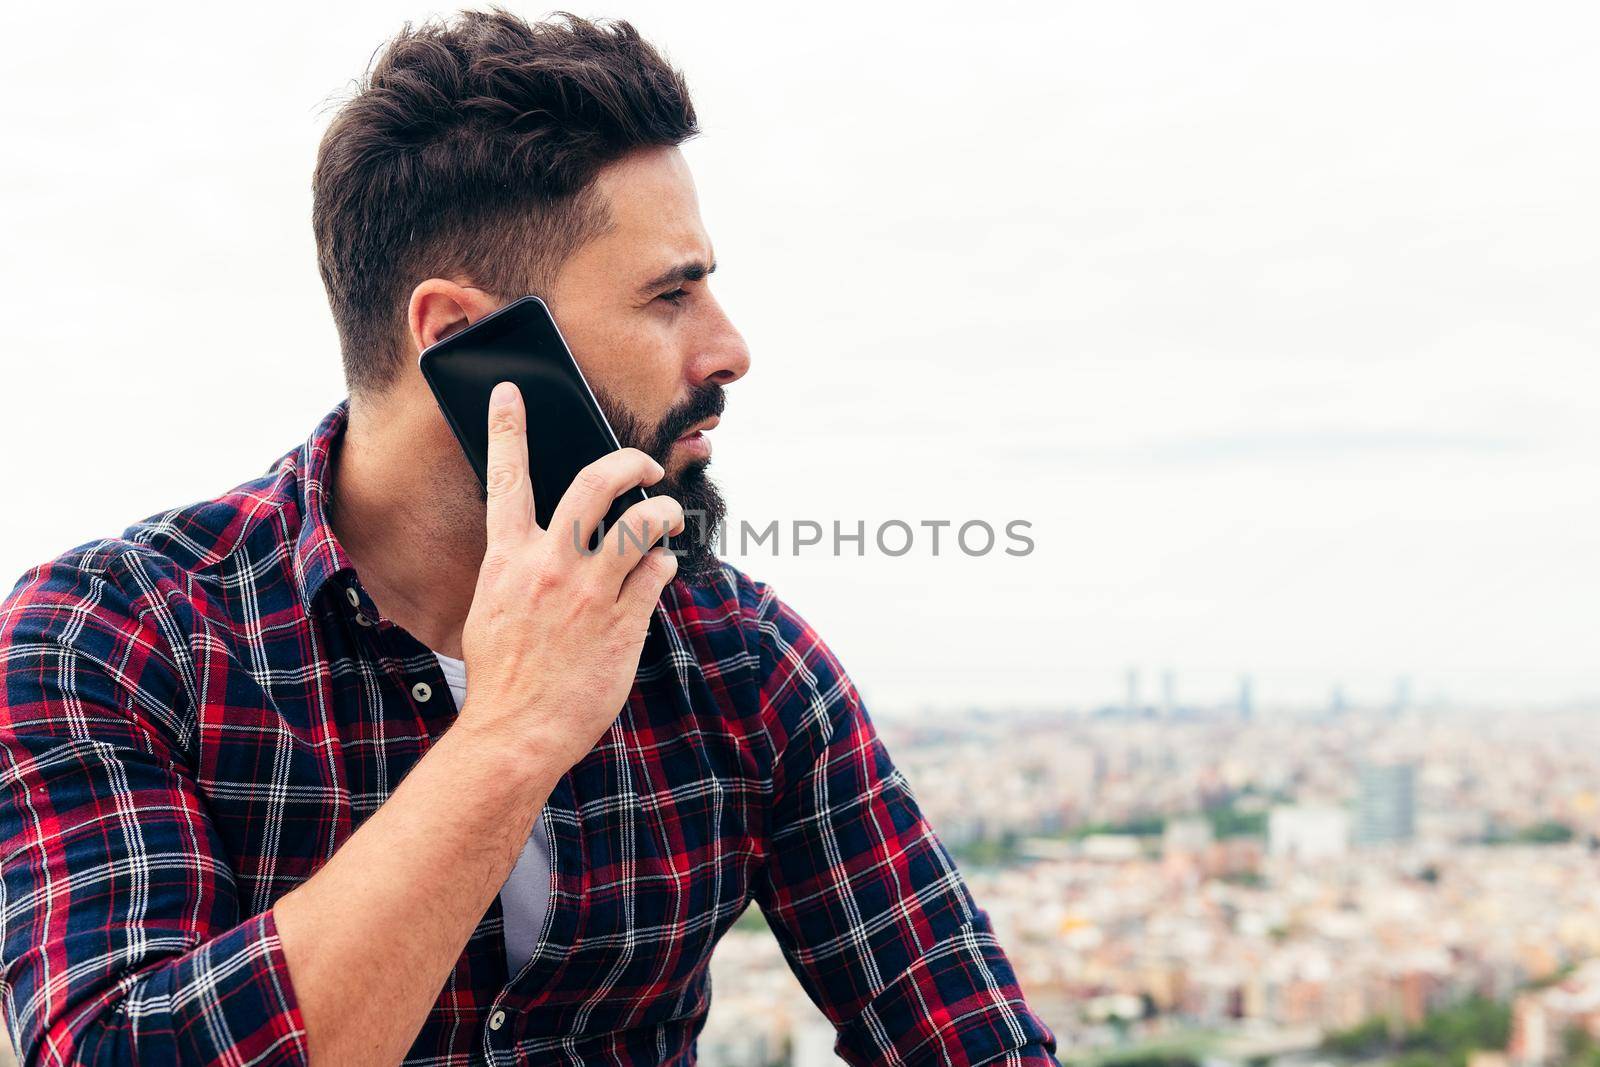 portrait of a handsome bearded man talking by mobile phone outdoors, concept of freedom and technology, copy space for text